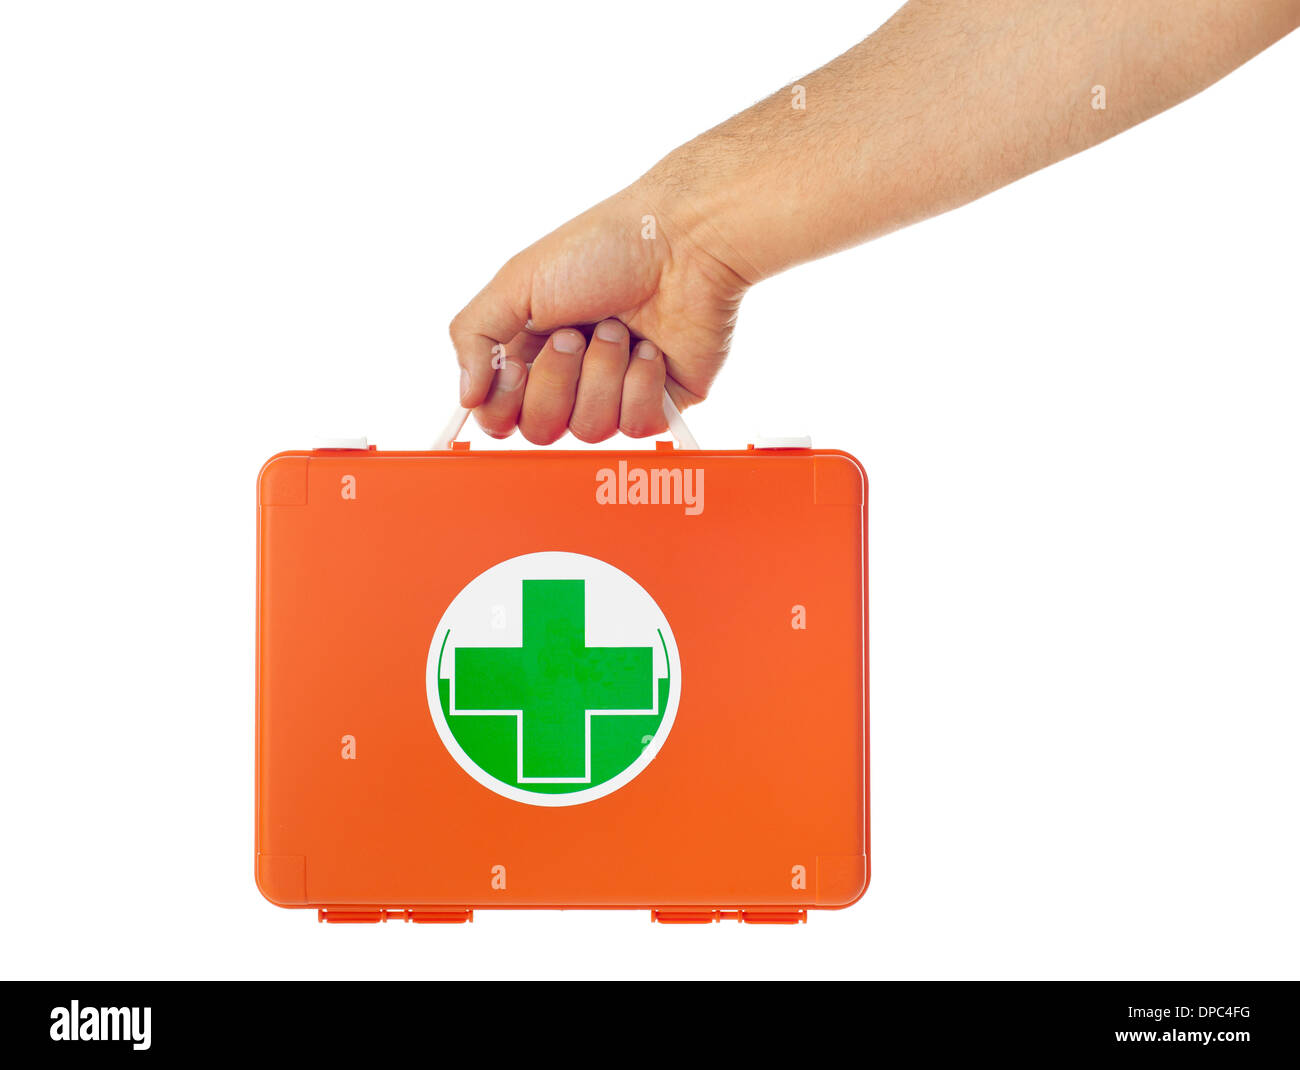 Hand of young man holding first aid kit. Stock Photo